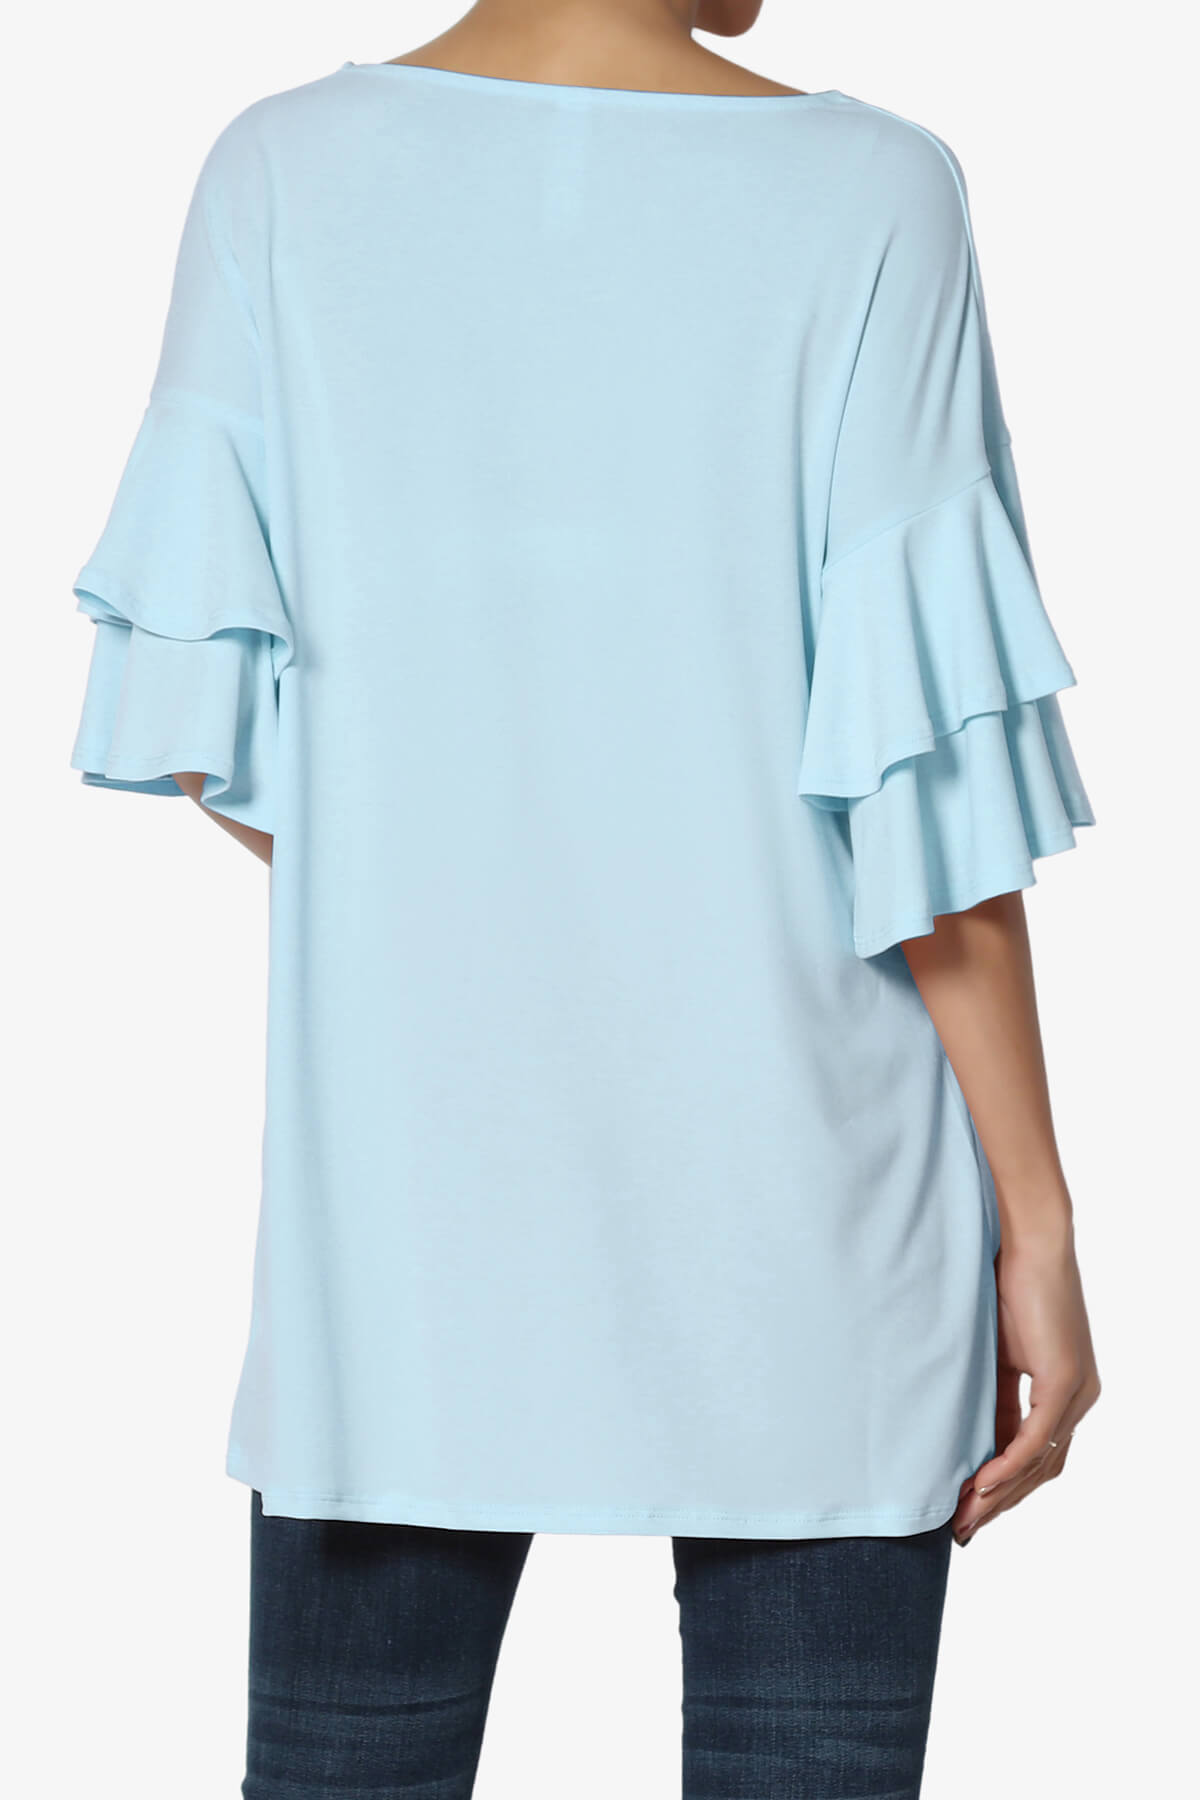 Boat Neck Loose 3/4 Top Tiered Bell TheMogan Casual Sleeve Shirt T-Shirt Blouse –